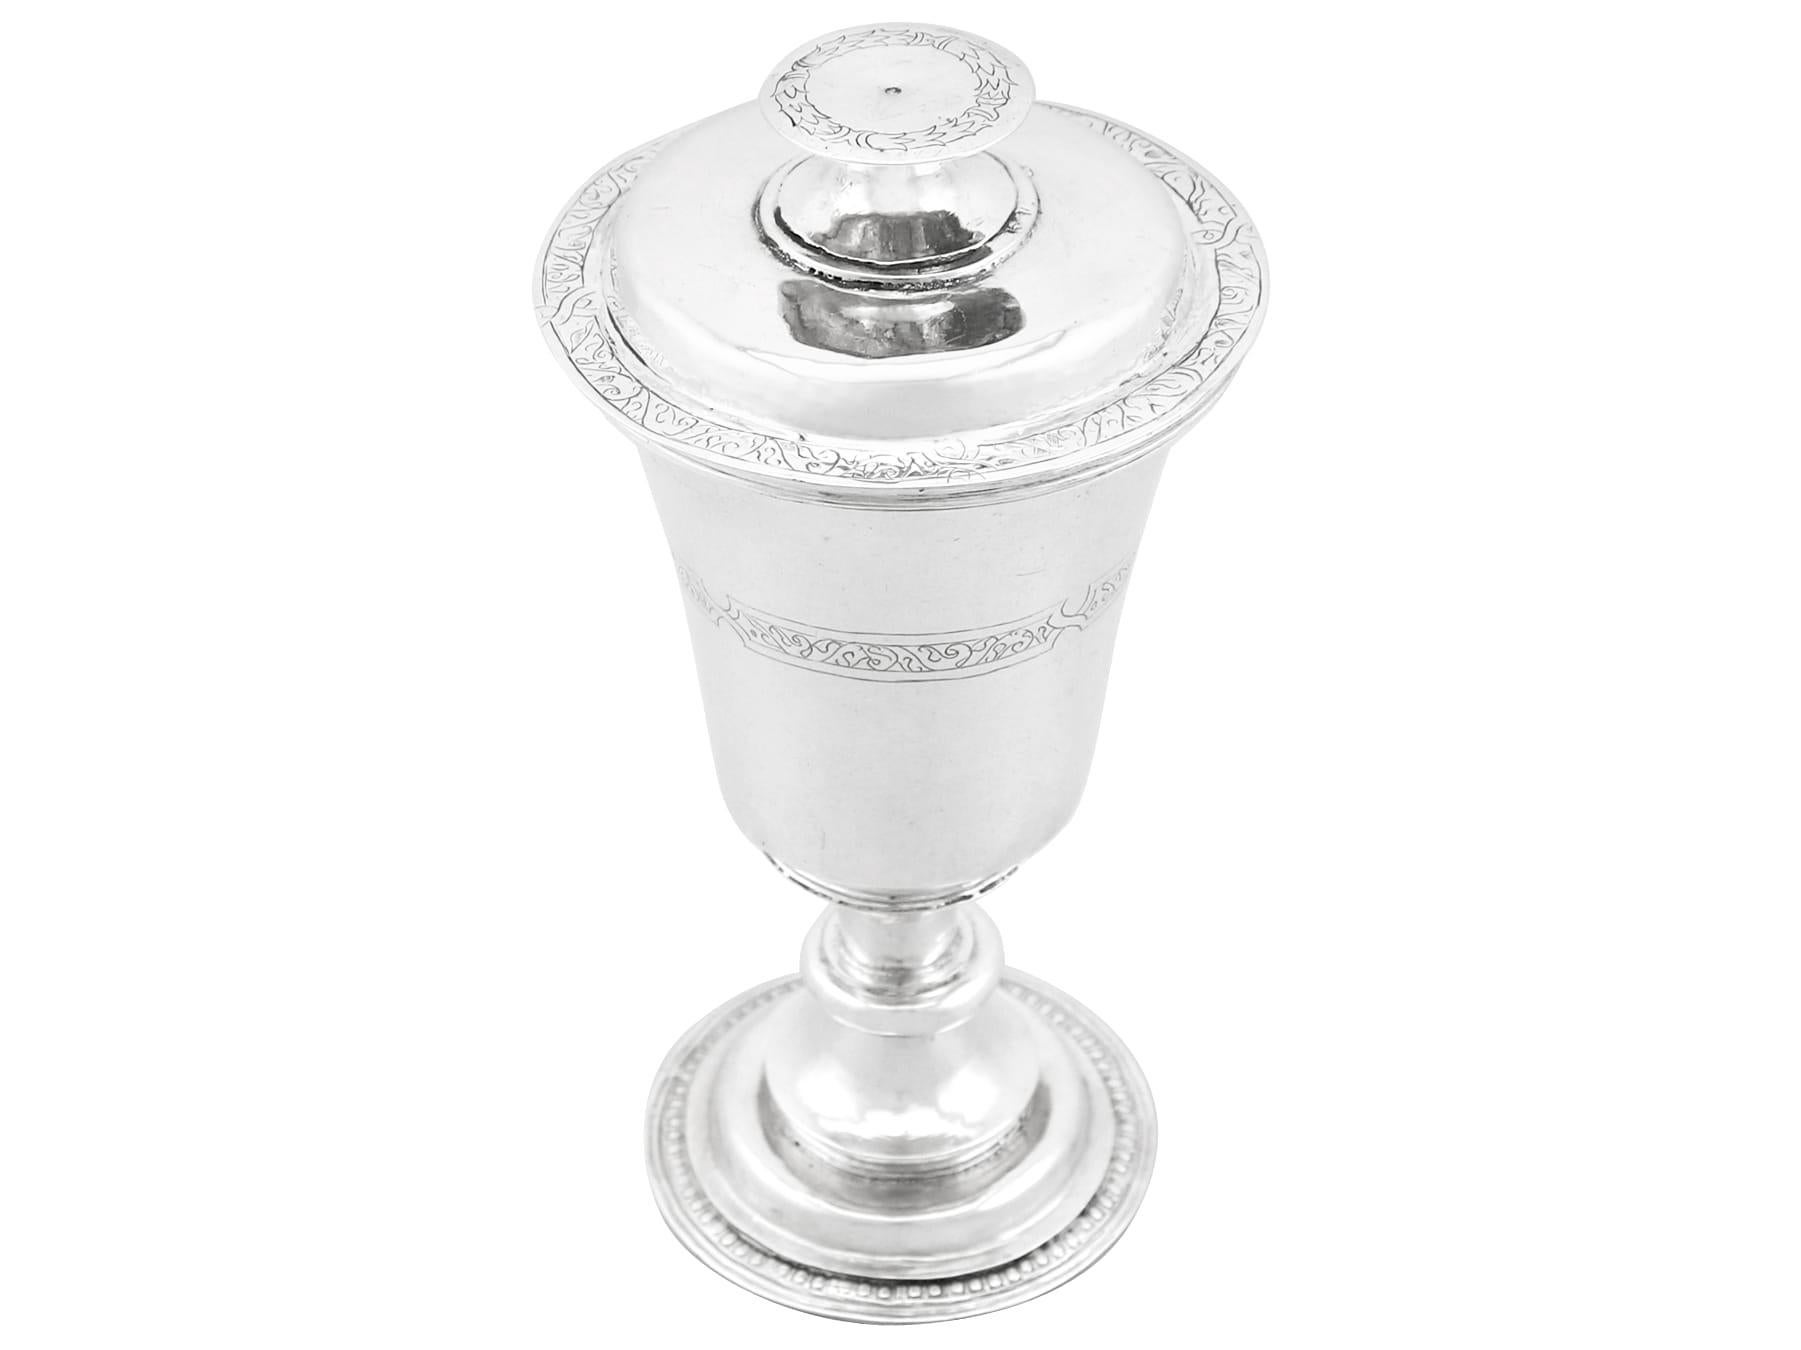 English 1500s Elizabethan Sterling Silver Communion Chalice and Paten For Sale